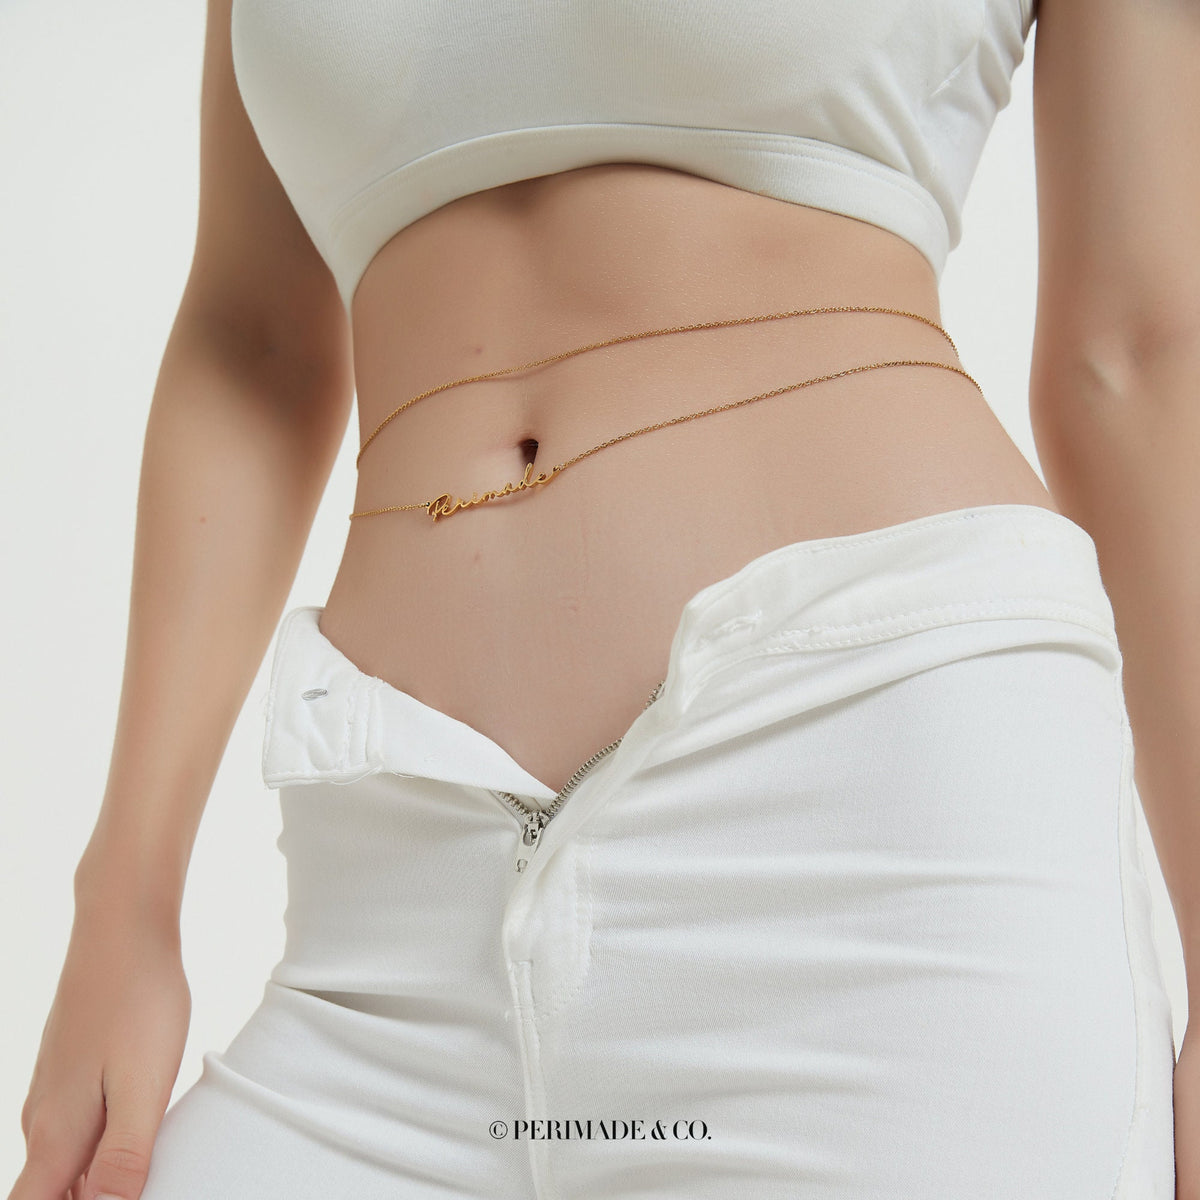 Personalized Name Belly Chain – Perimade & Co.